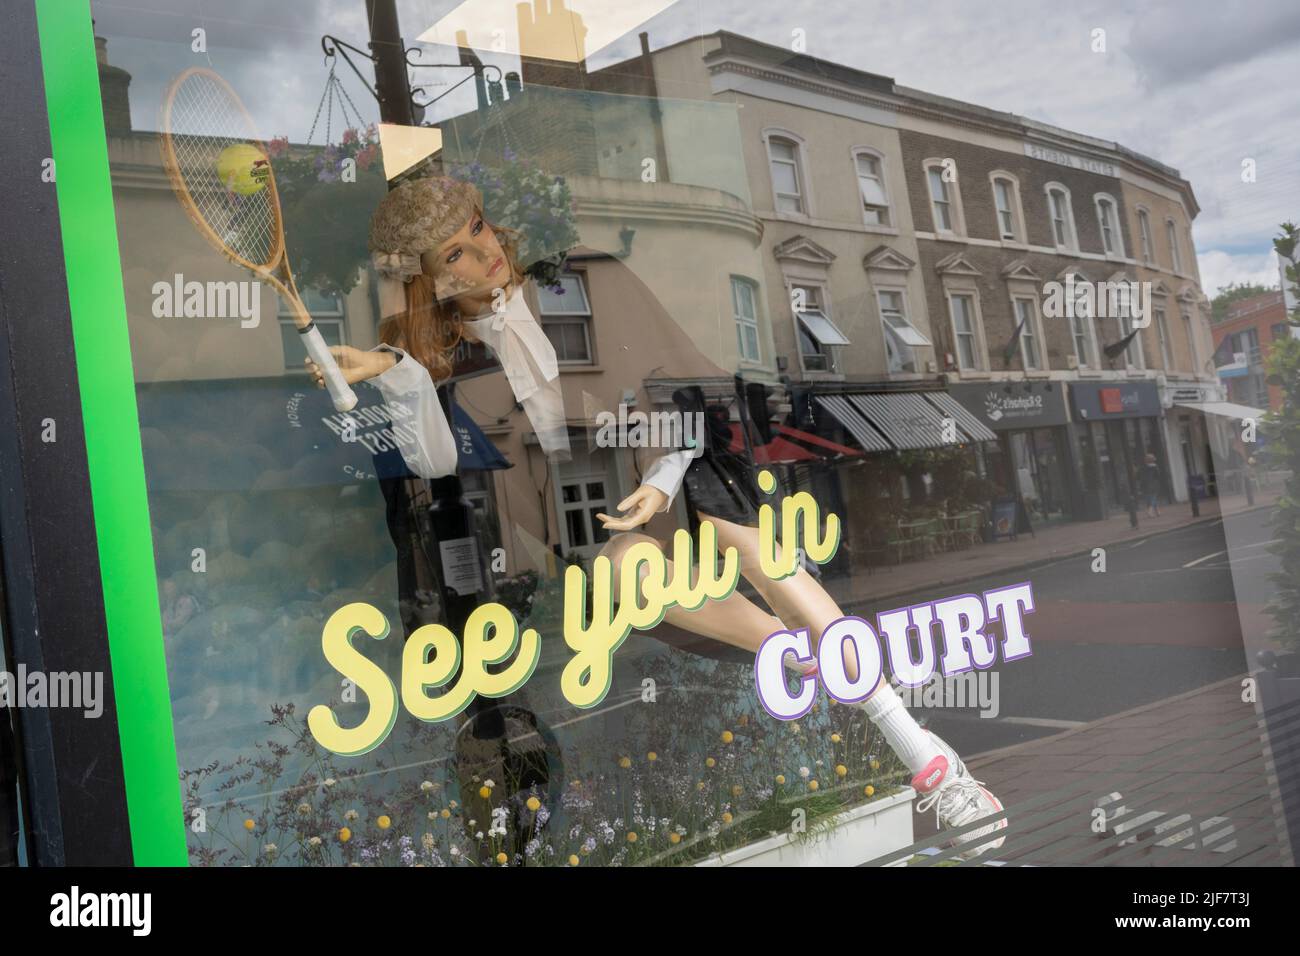 A Wimbledon tennis theme pun is seen in the window of a solicitor's busines in  Wimbledon Village during the Lawn Tennis Association's two-week championships, on 30th June 2022, in London, England. Stock Photo